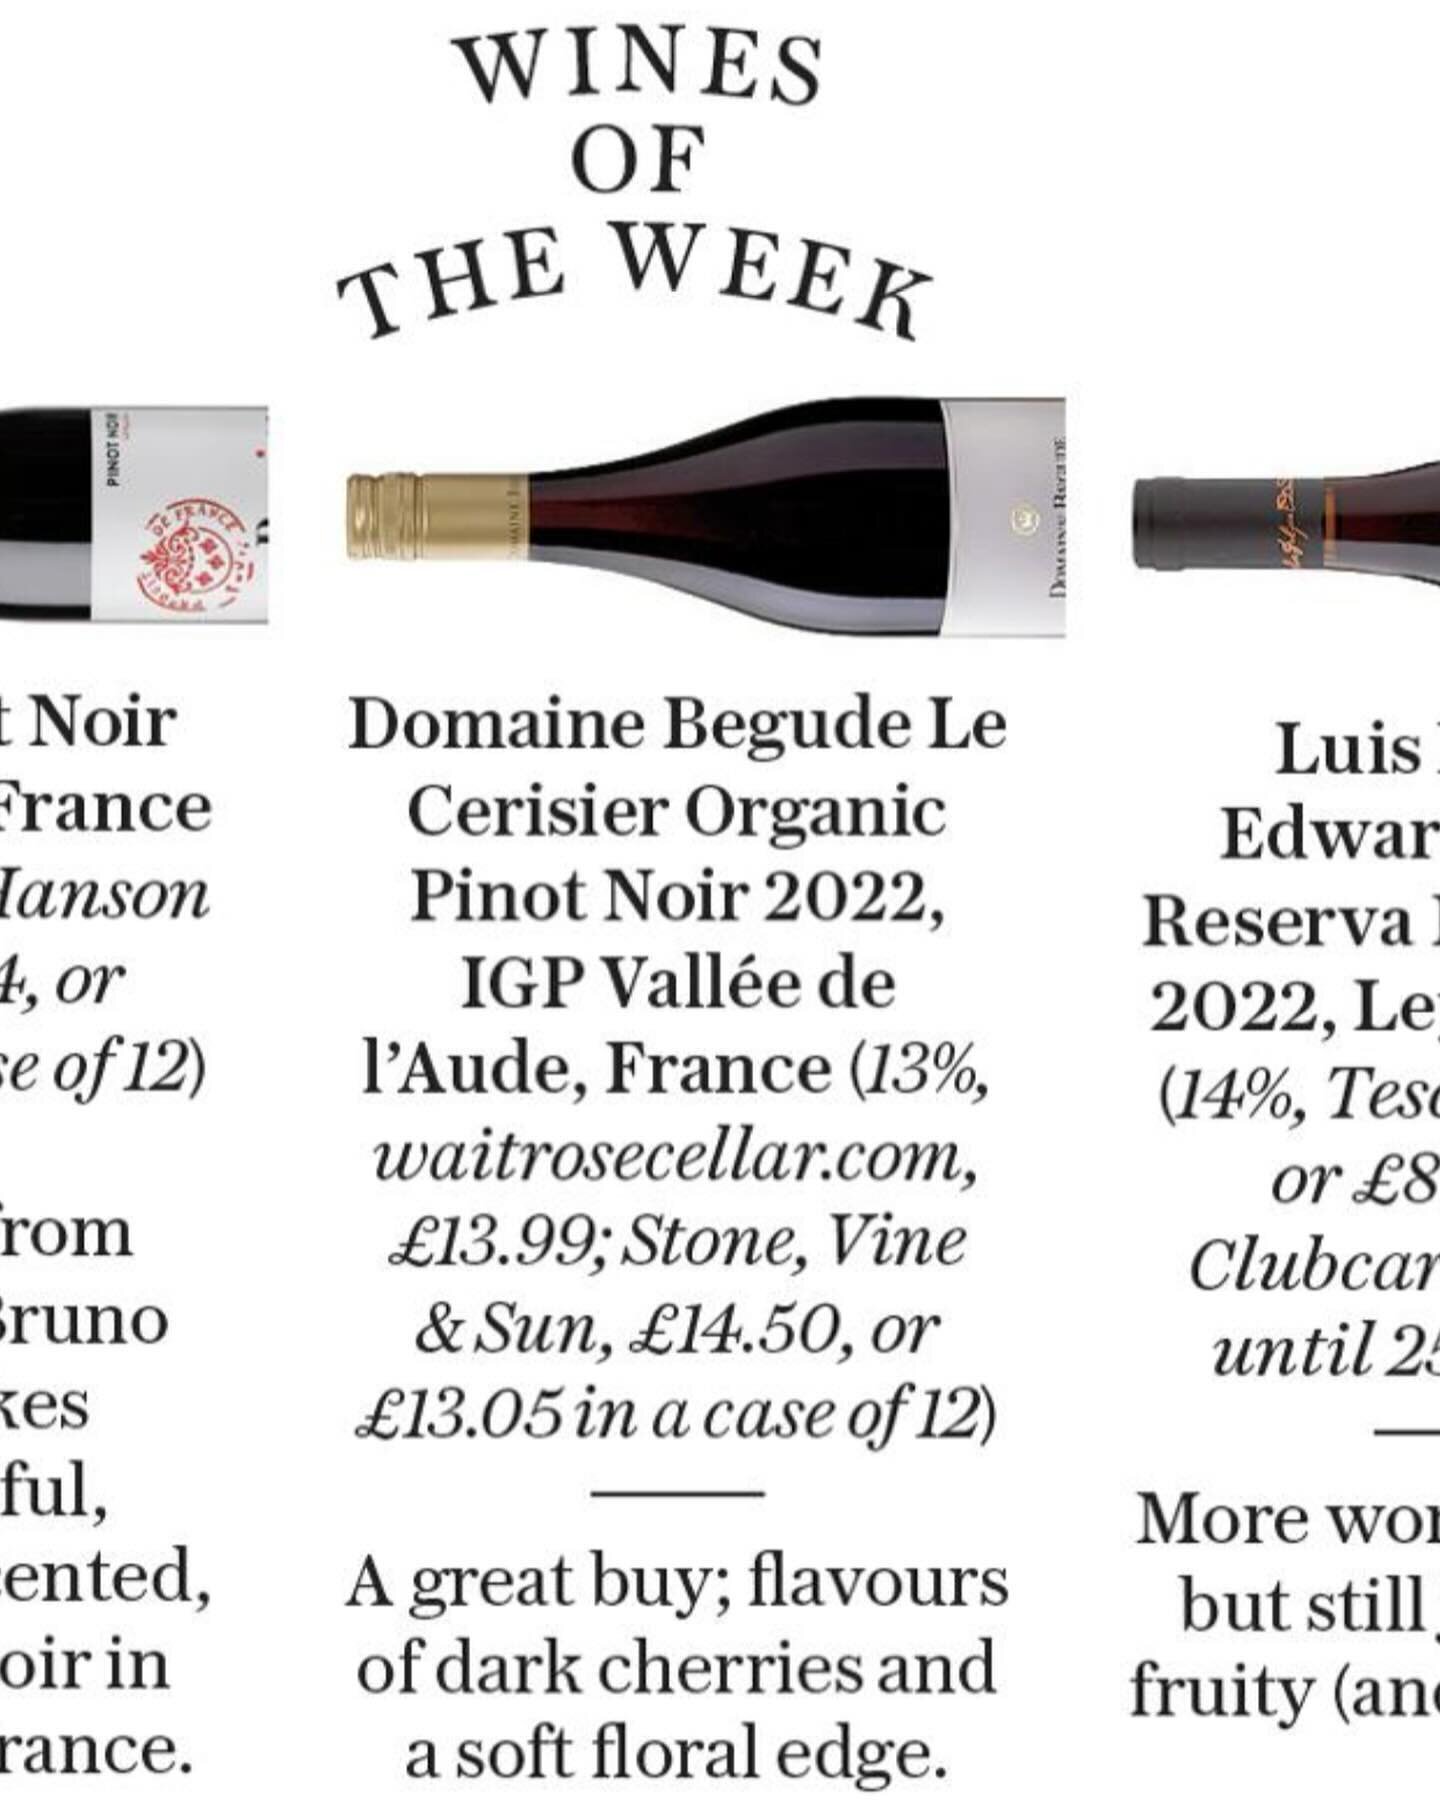 Very kind write up in Daily Telegraph by @how_to_drink . Love the idea of New Pinot Now. Glad Cerisier is a member of this club.